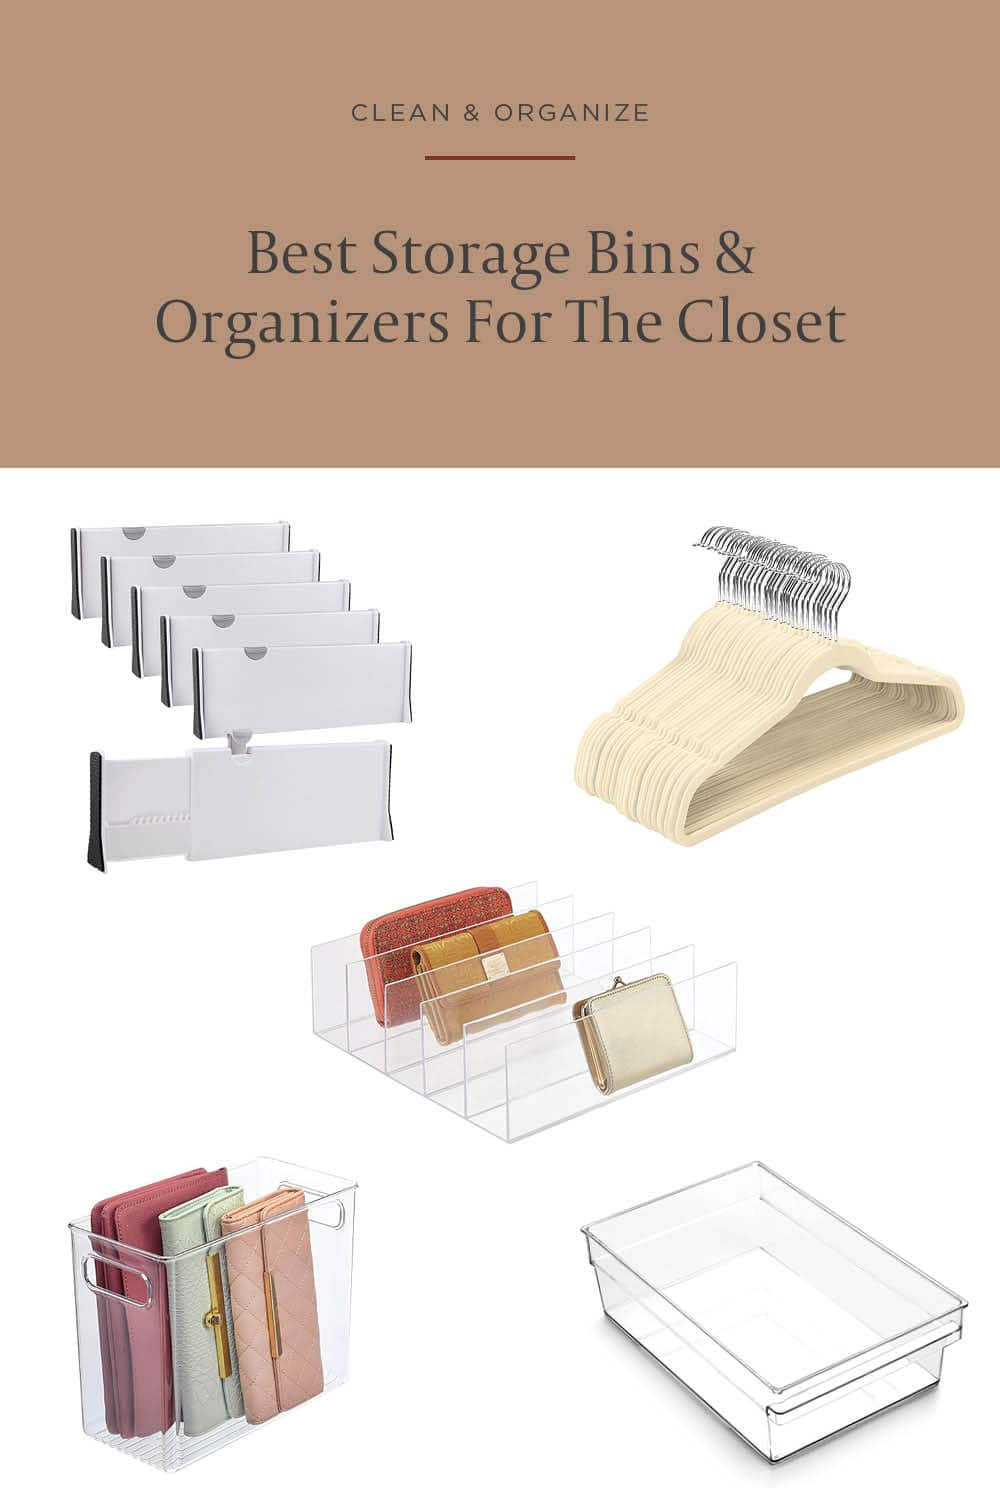 https://houseofhipsters.com/wp-content/uploads/2021/09/best-home-organization-products-closet.jpg